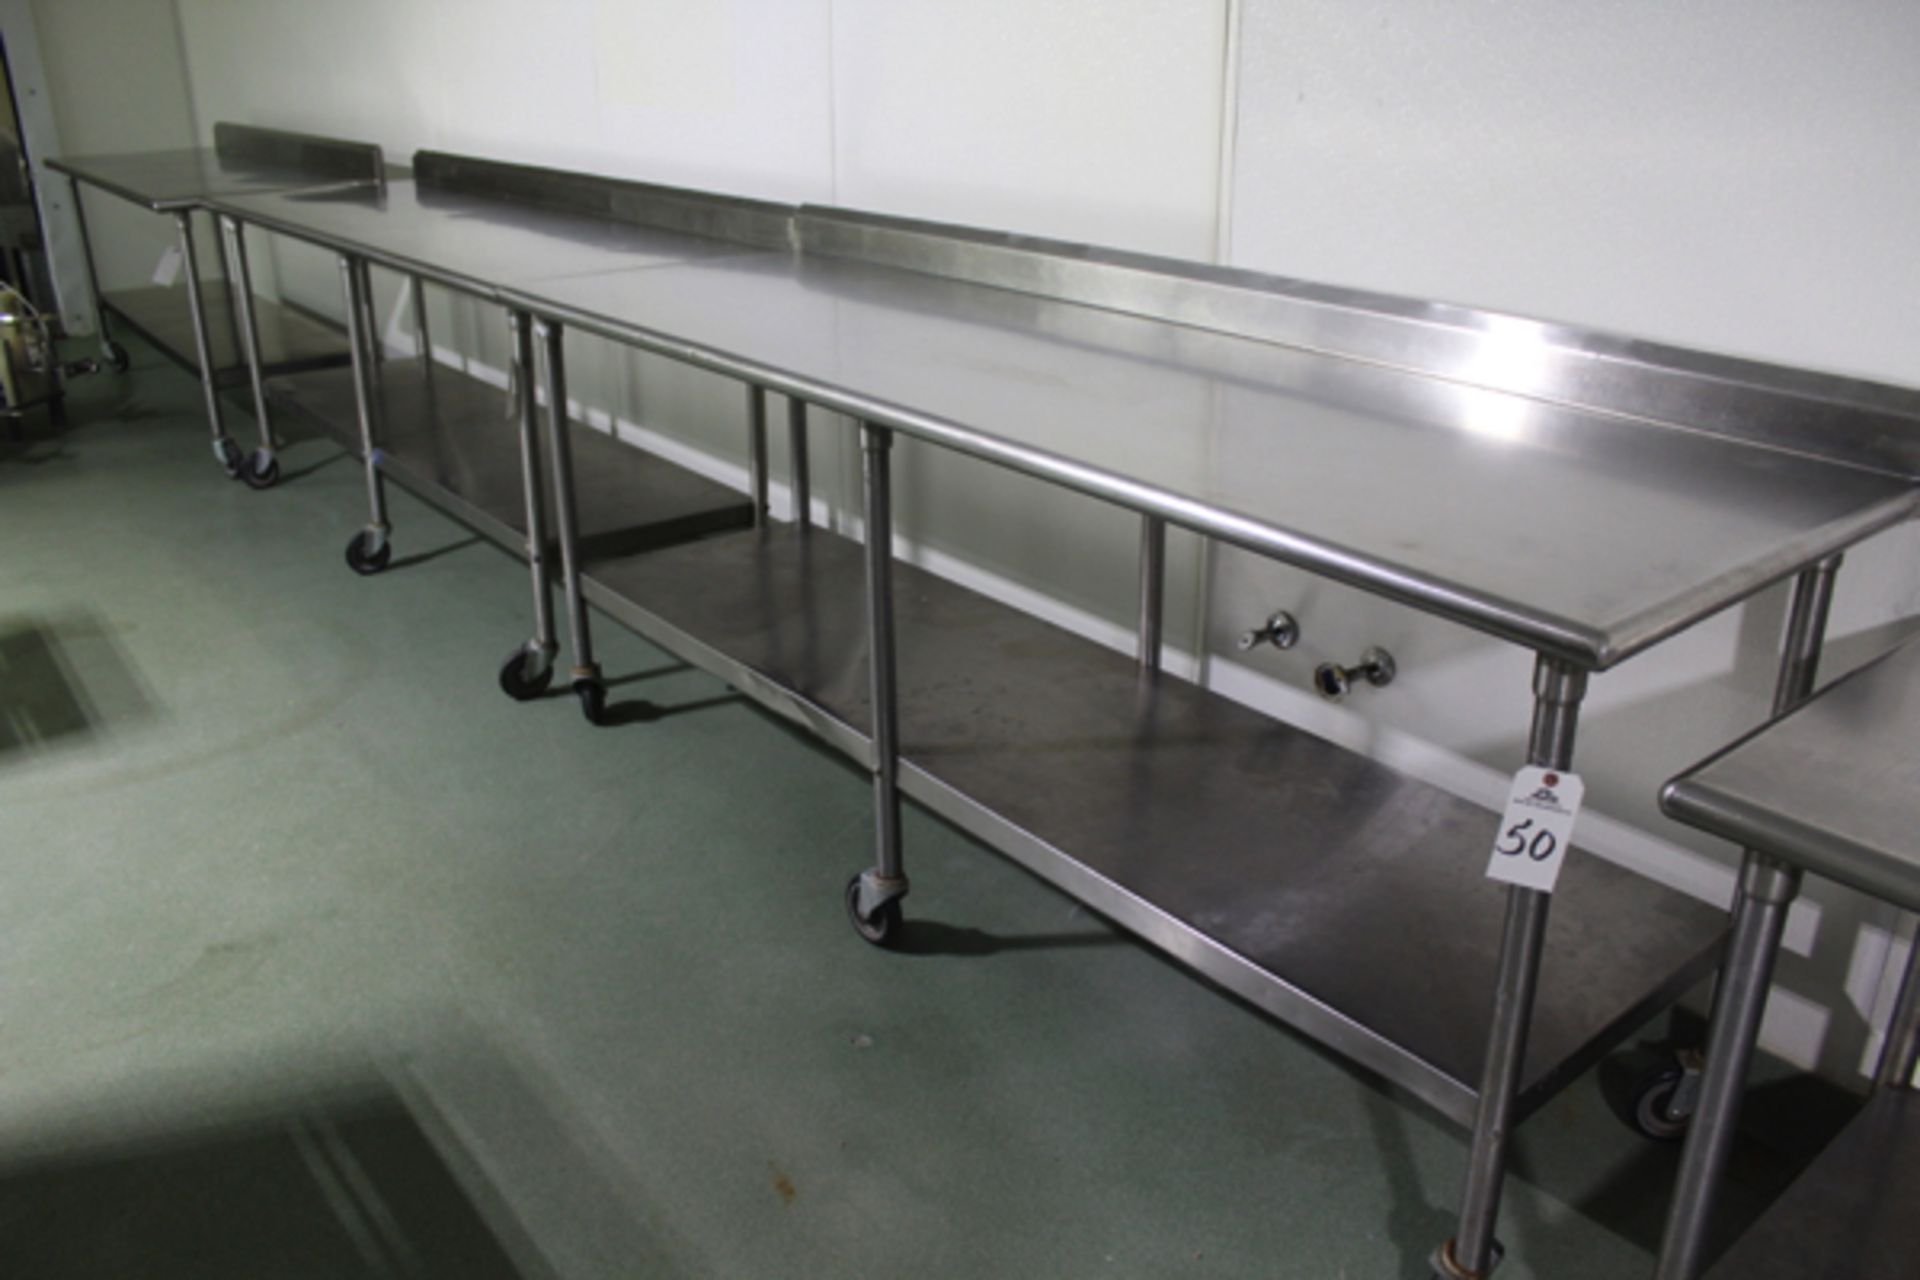 Stainless Steel Prep Table, 30" x 8' | Loading Price: $25 Or Buyer May Hand Carry By February 3rd,